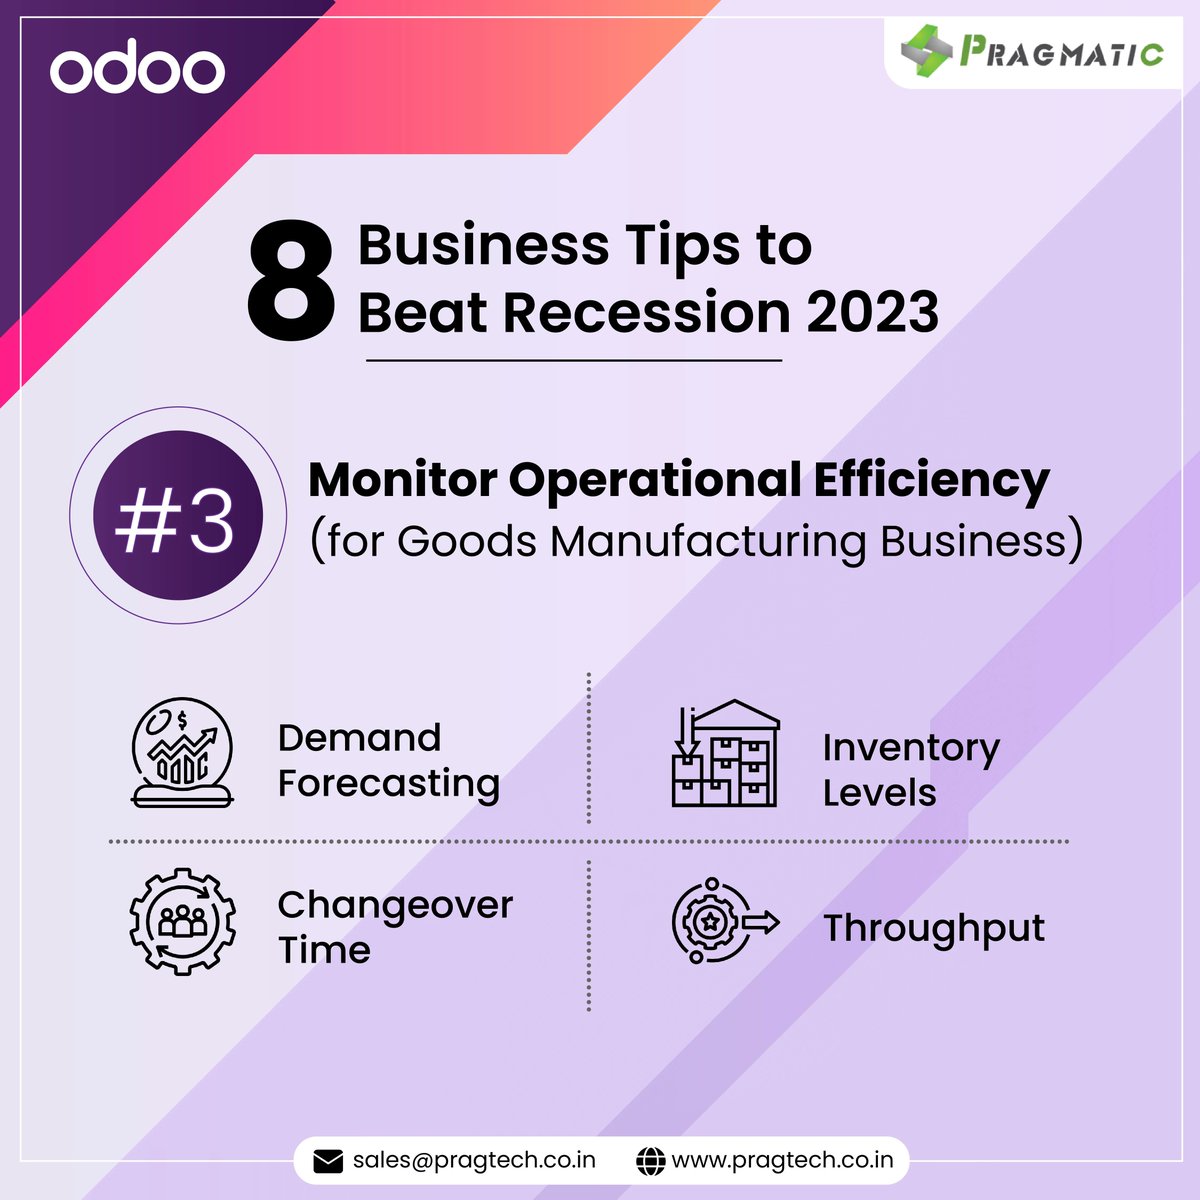 Read full-length blog here - buff.ly/3vhOGEF

Talk To Our Experts here - buff.ly/3dJCDL7
#pragtech #recession #odoo #Odoo16 #customerservice #bulletproofbusiness #recession2023 #recessionproof #recessionproofbusiness #promptservice #economy #EconomyCrisis